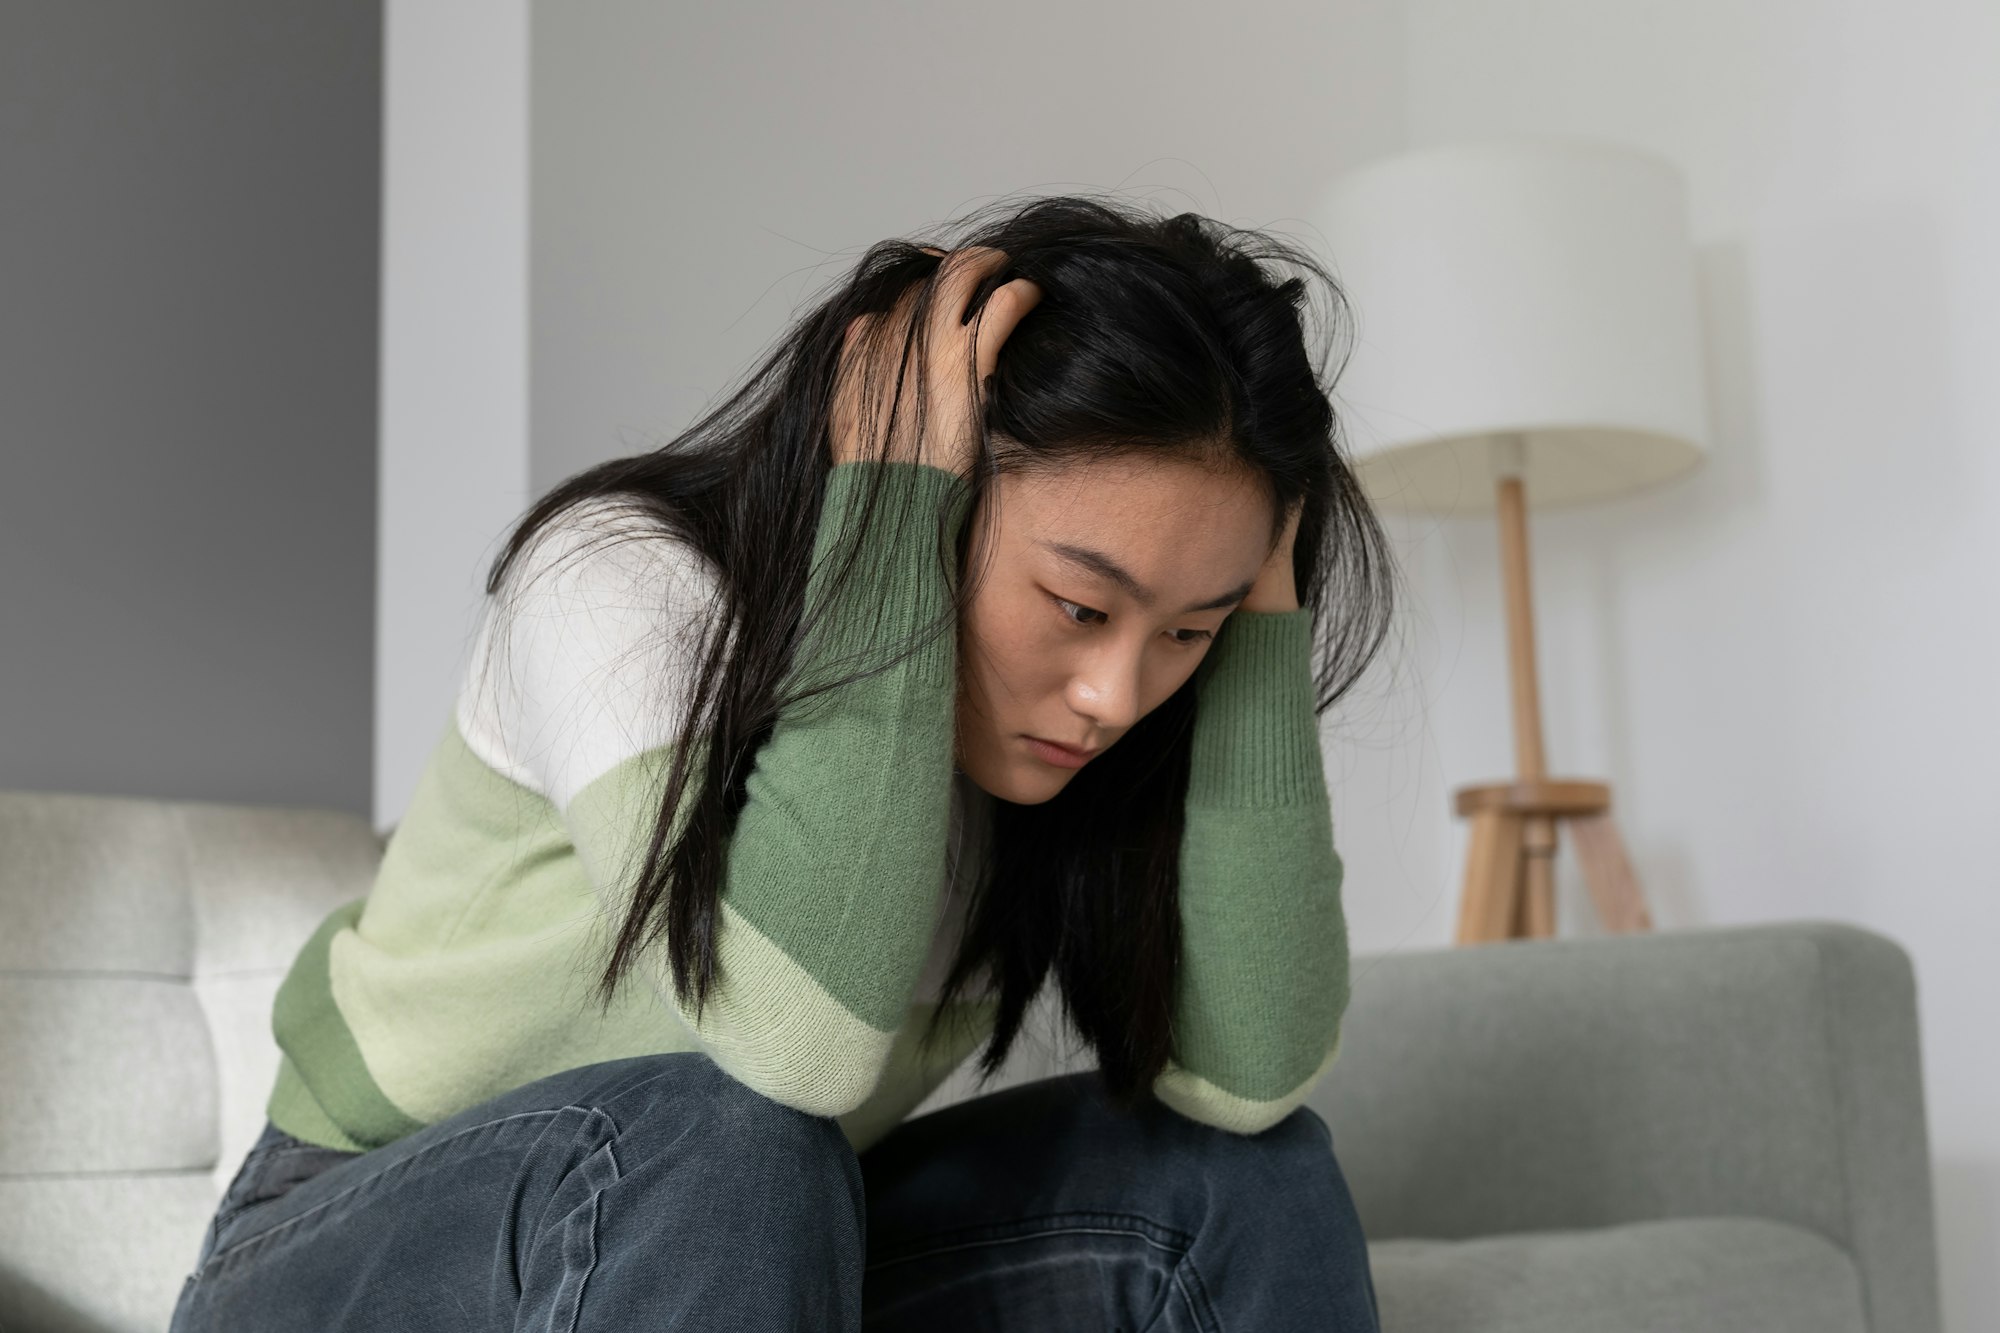 Anxious worried Asian millennial girl holding head in hands dealing with depression after abortion